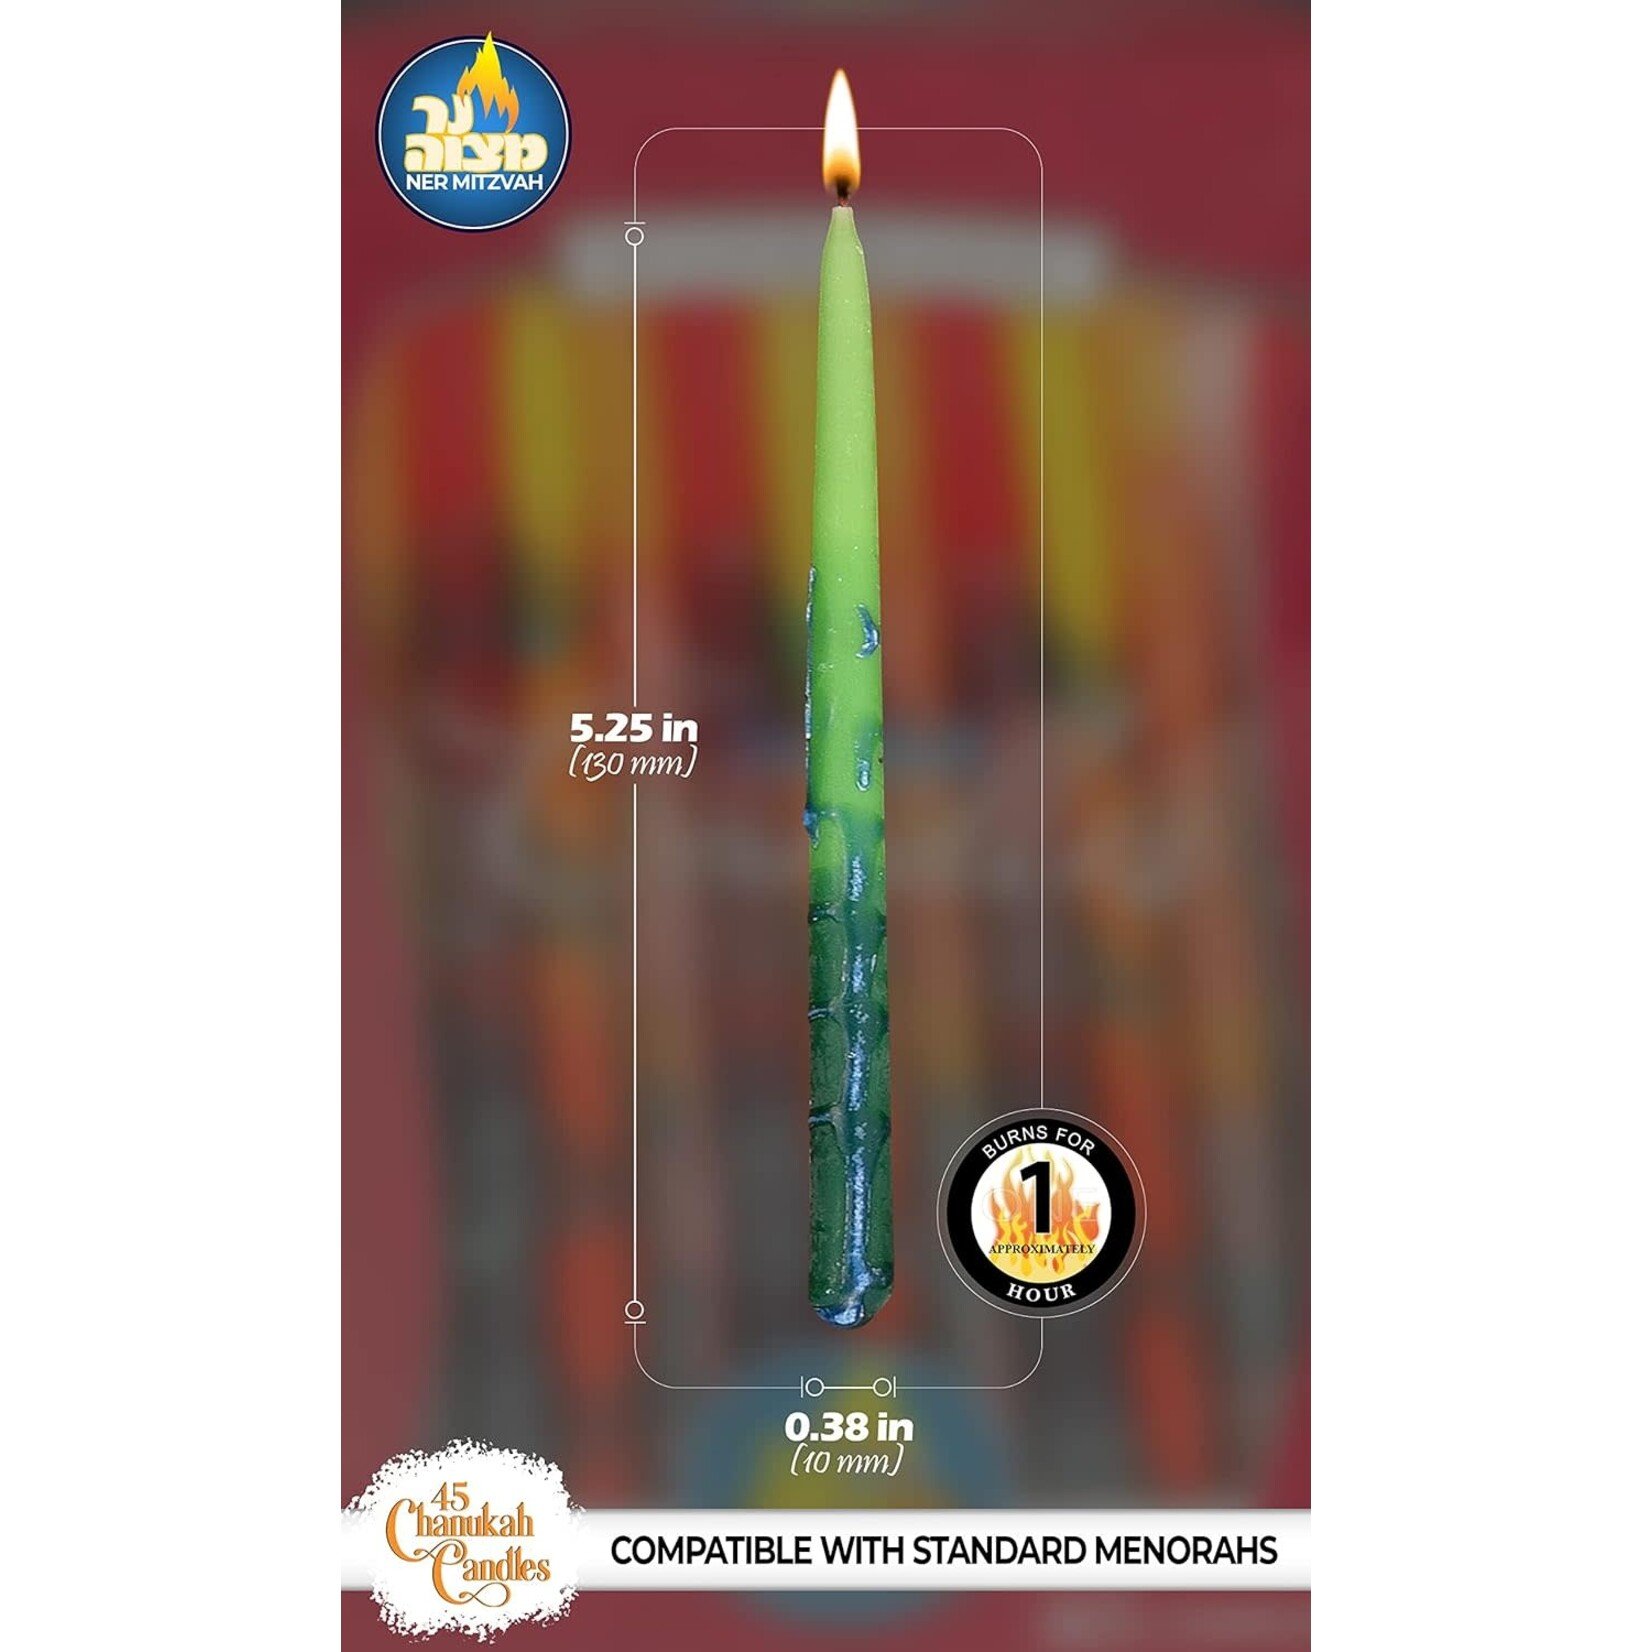 Beeswax Chanukah Candles - Decorated Multi Color - 45 Pack